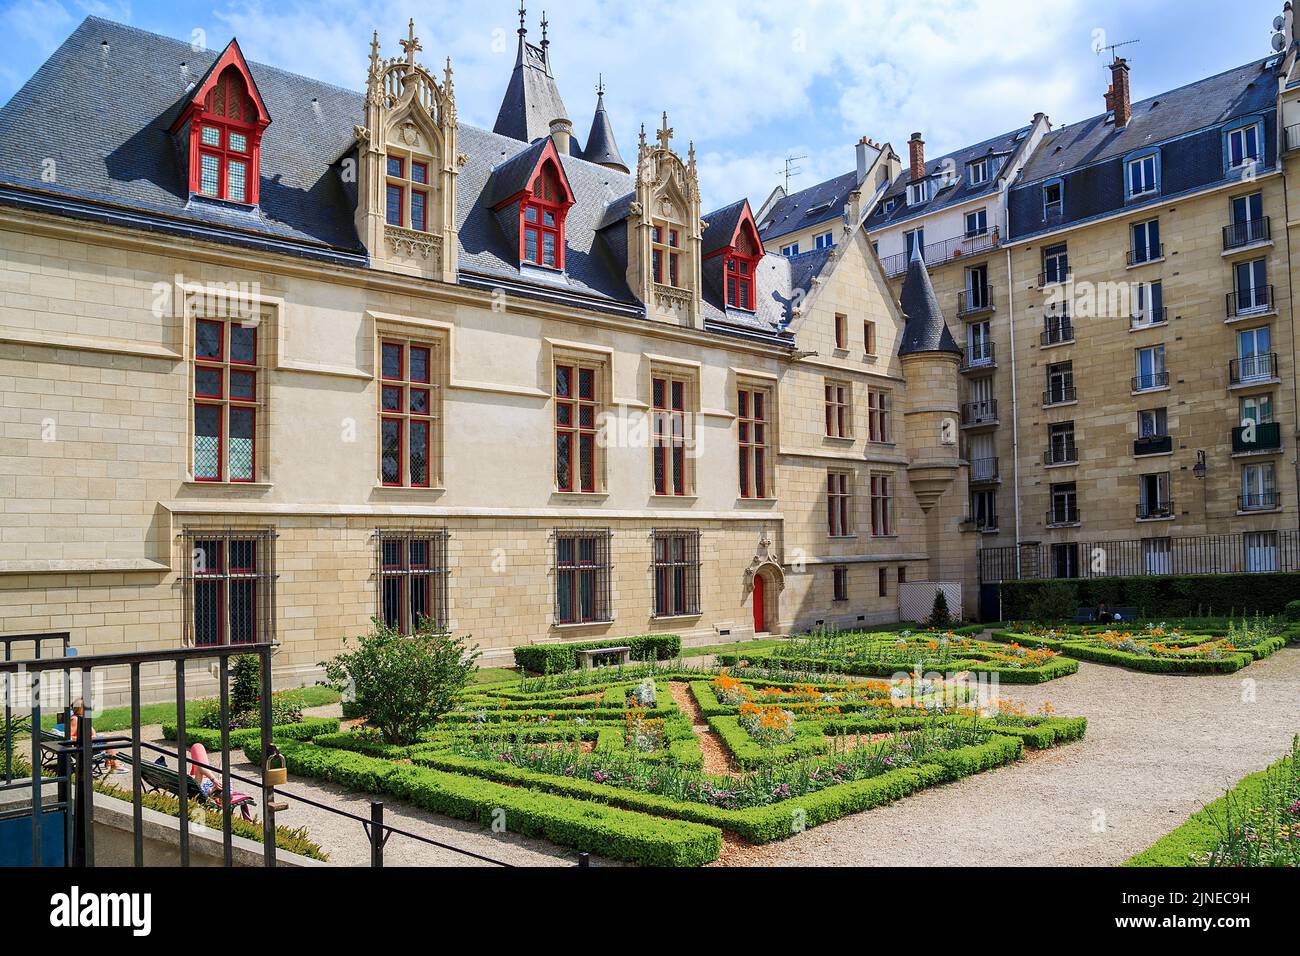 PARIS, FRANCE - MAY 13, 2015: Hotel de Sens is a small urban palace, with architectural elements of a castle or fortress. Stock Photo